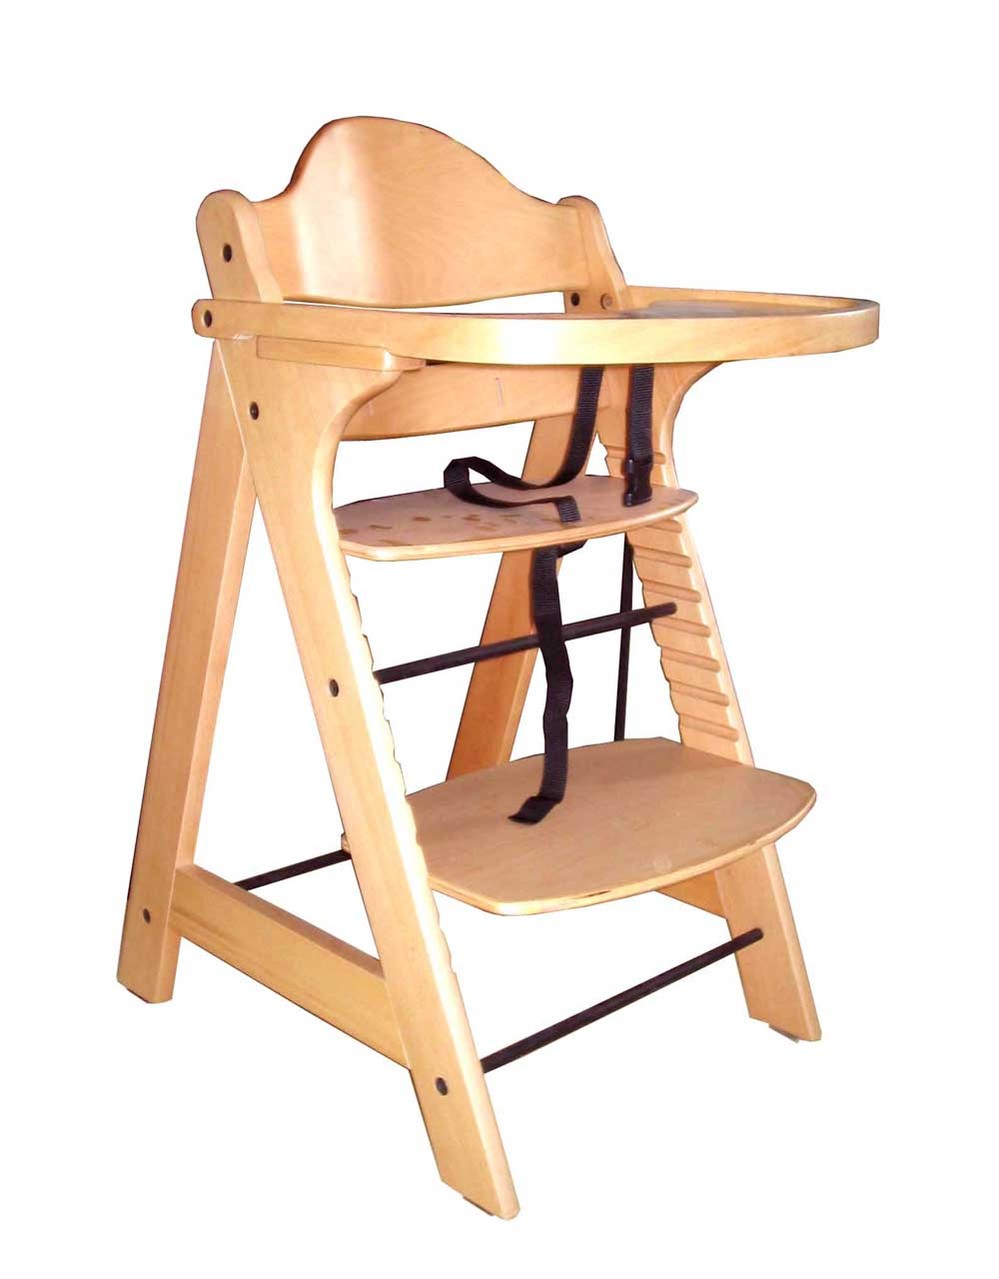 wooden high chair for babies